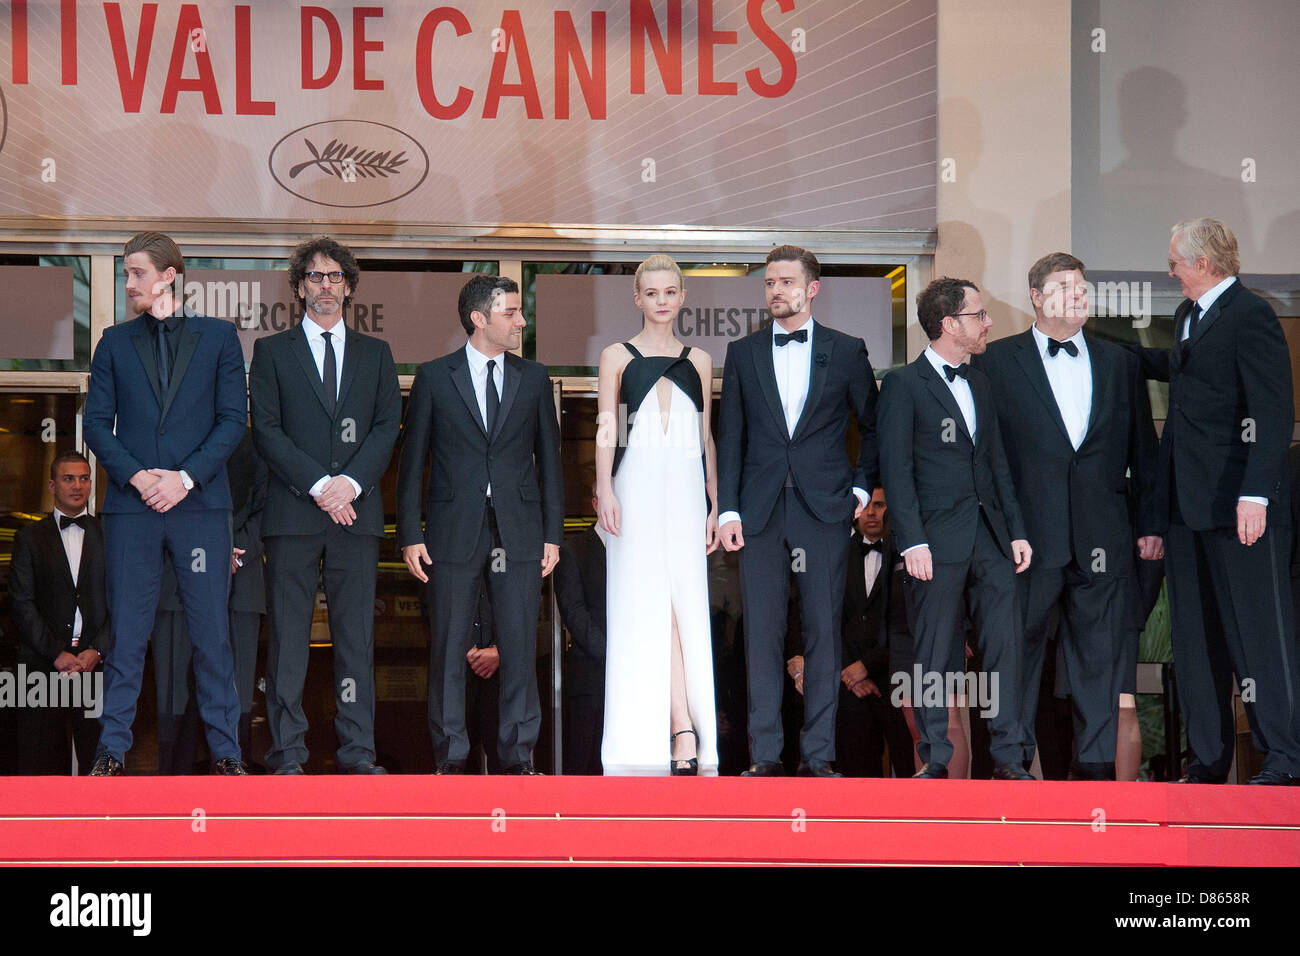 Cannes, France. 19th May, 2013. Actor Garrett Hedlund, director Joel Coen, actors Oscar Isaac, Carey Mulligan, Justin Timberlake, director Ethan Coen, John Goodman and musician and producer T Bone Burnett attending the 'Inside Llewyn Davis' premiere at the 66th Cannes Film Festival. May 19, 2013. Credit: dpa/Alamy Live News Stock Photo